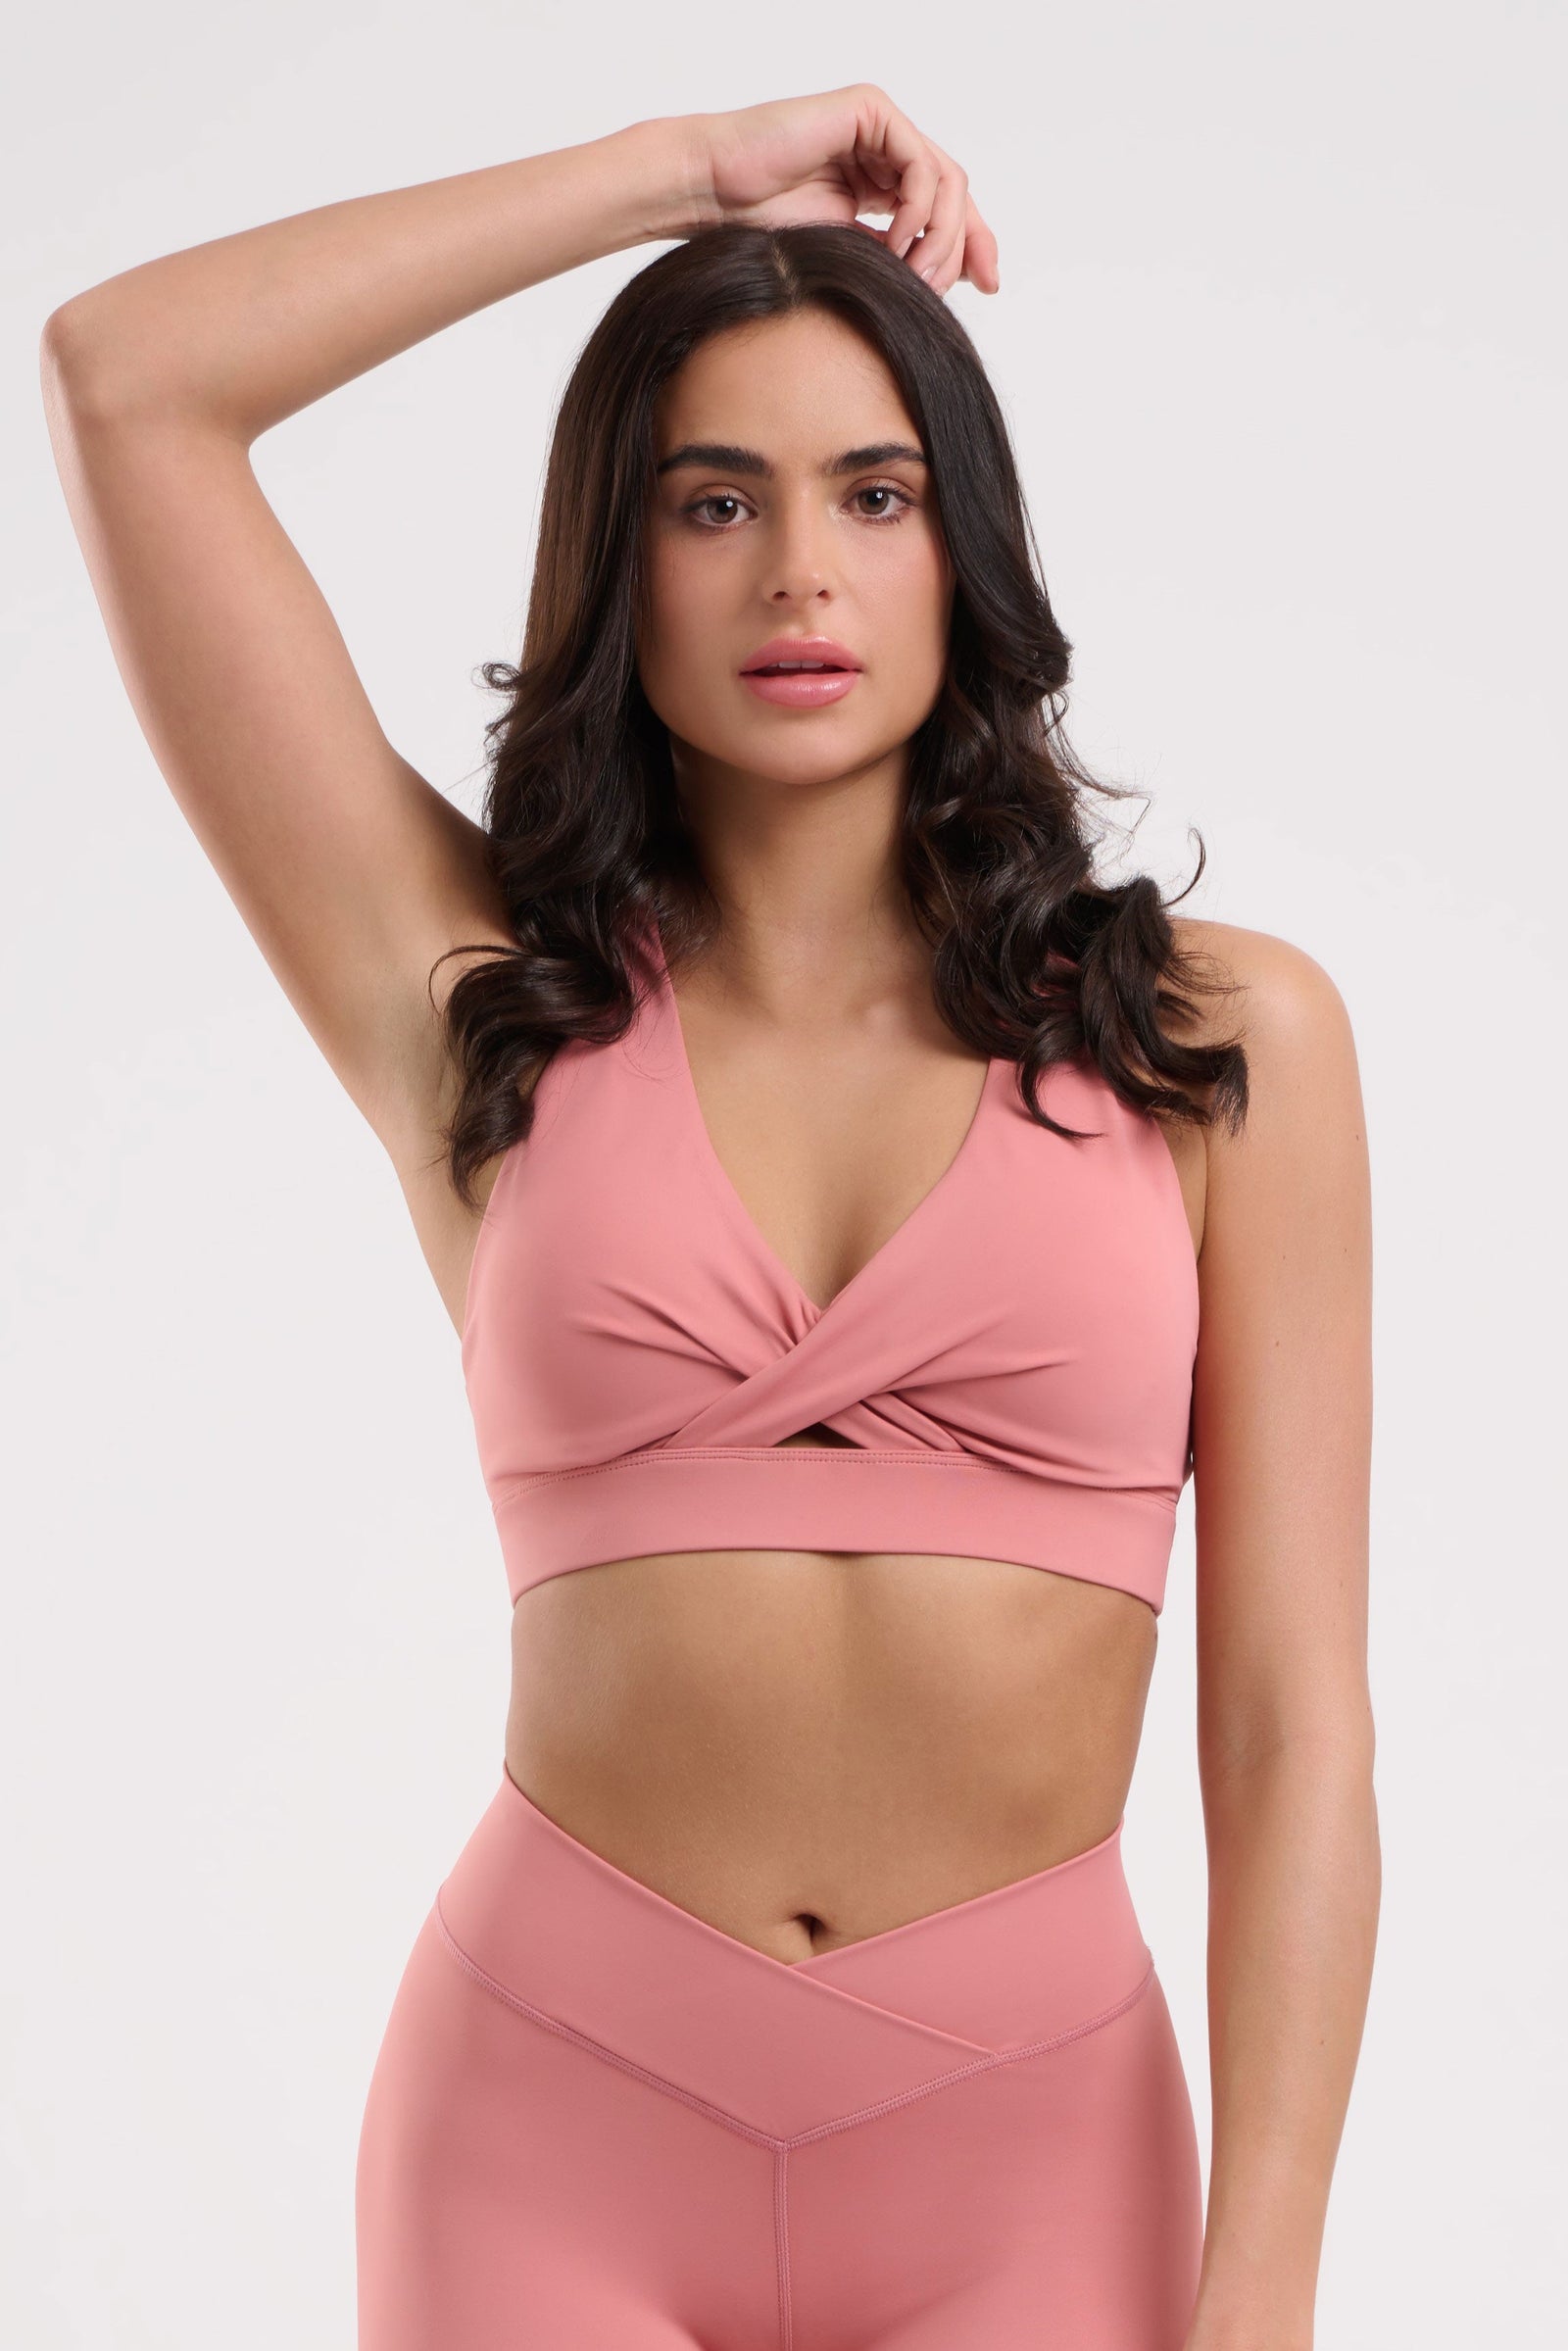 Womens Yoga Tops, Built In Bas & Twin Sets